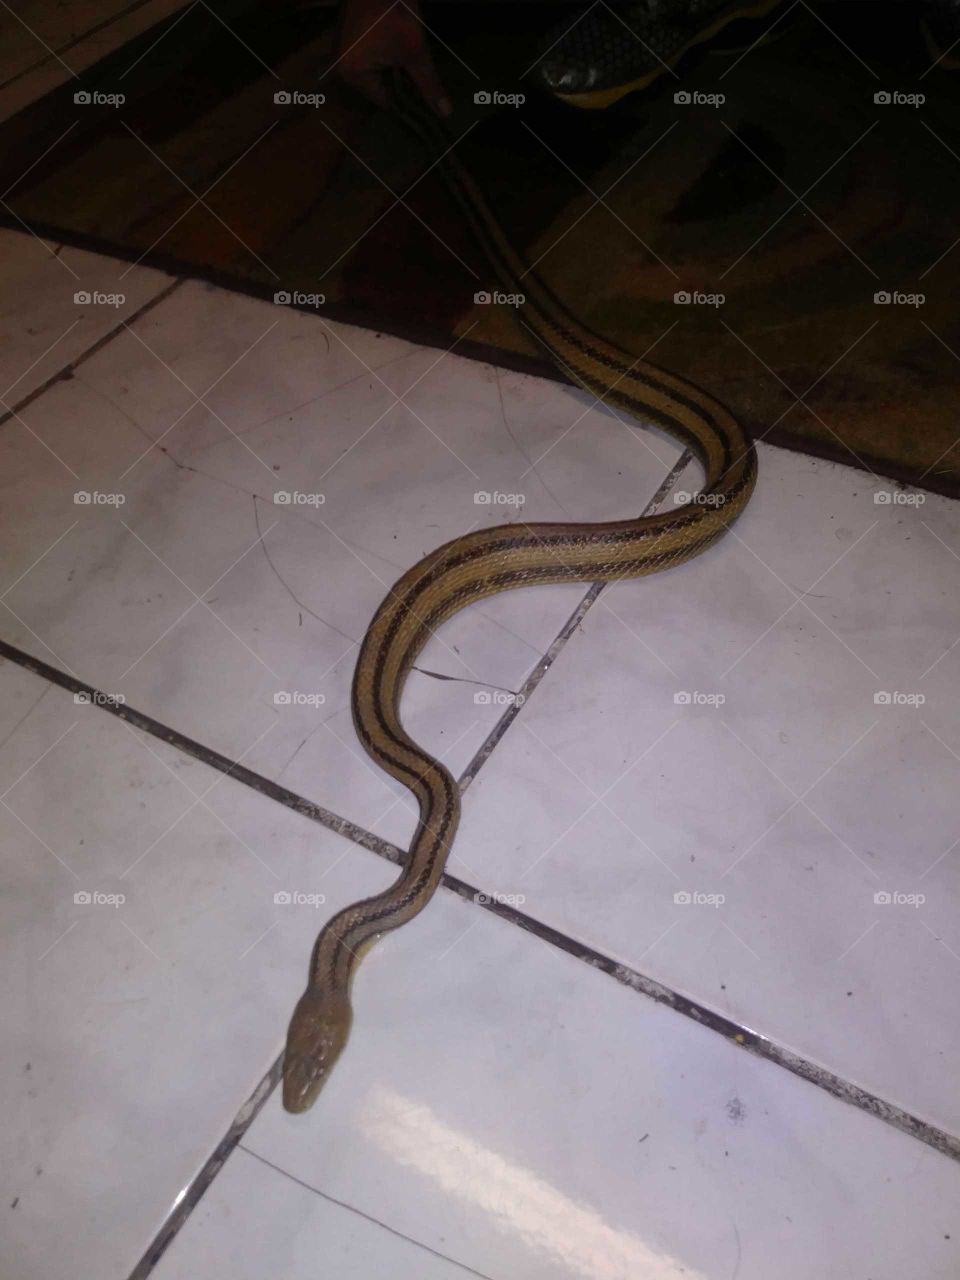 Imagine coming across this on your kitchen floor you'd be terrified right?Funny thing is he was a beautiful yellow and red rat snake and as unbelievable as it is was as tame as ever, never once try to strike but we did give them to a good home in the meantime it was intriguing.